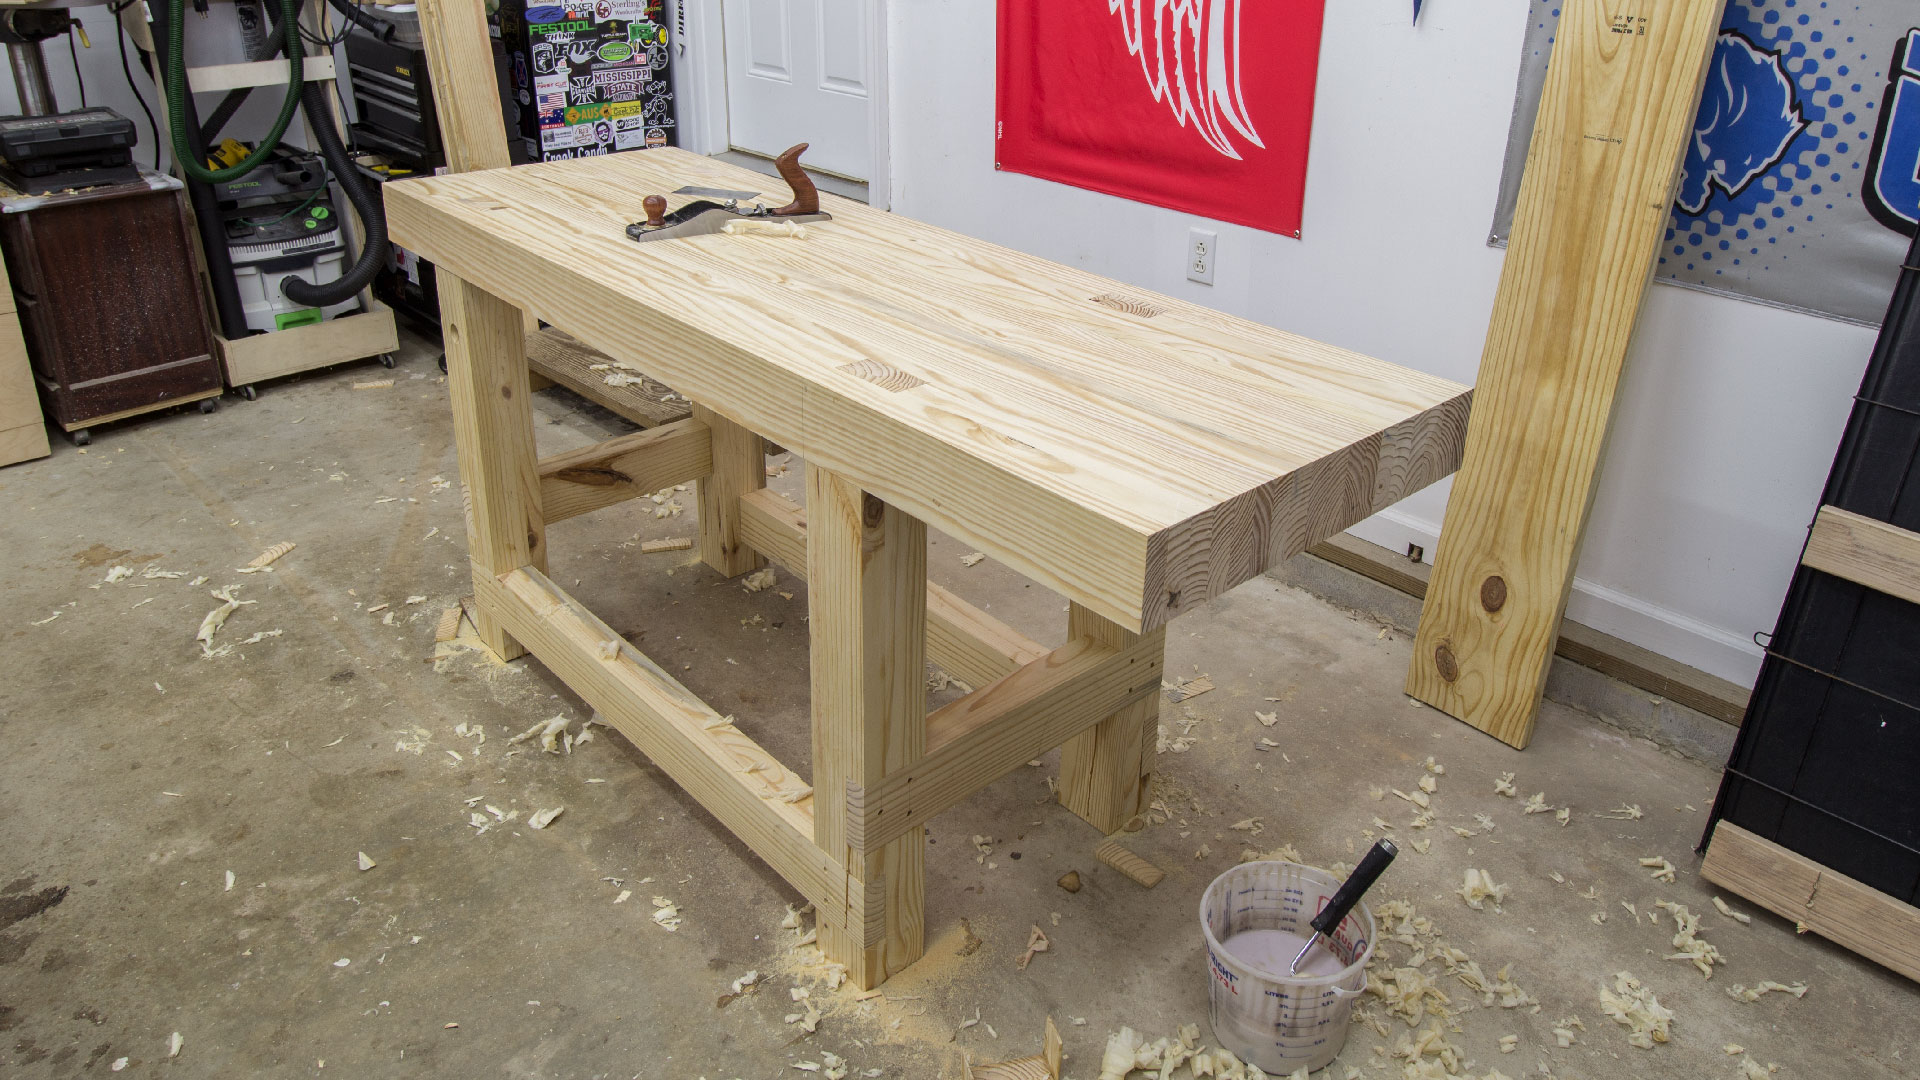 How to make a woodworking bench